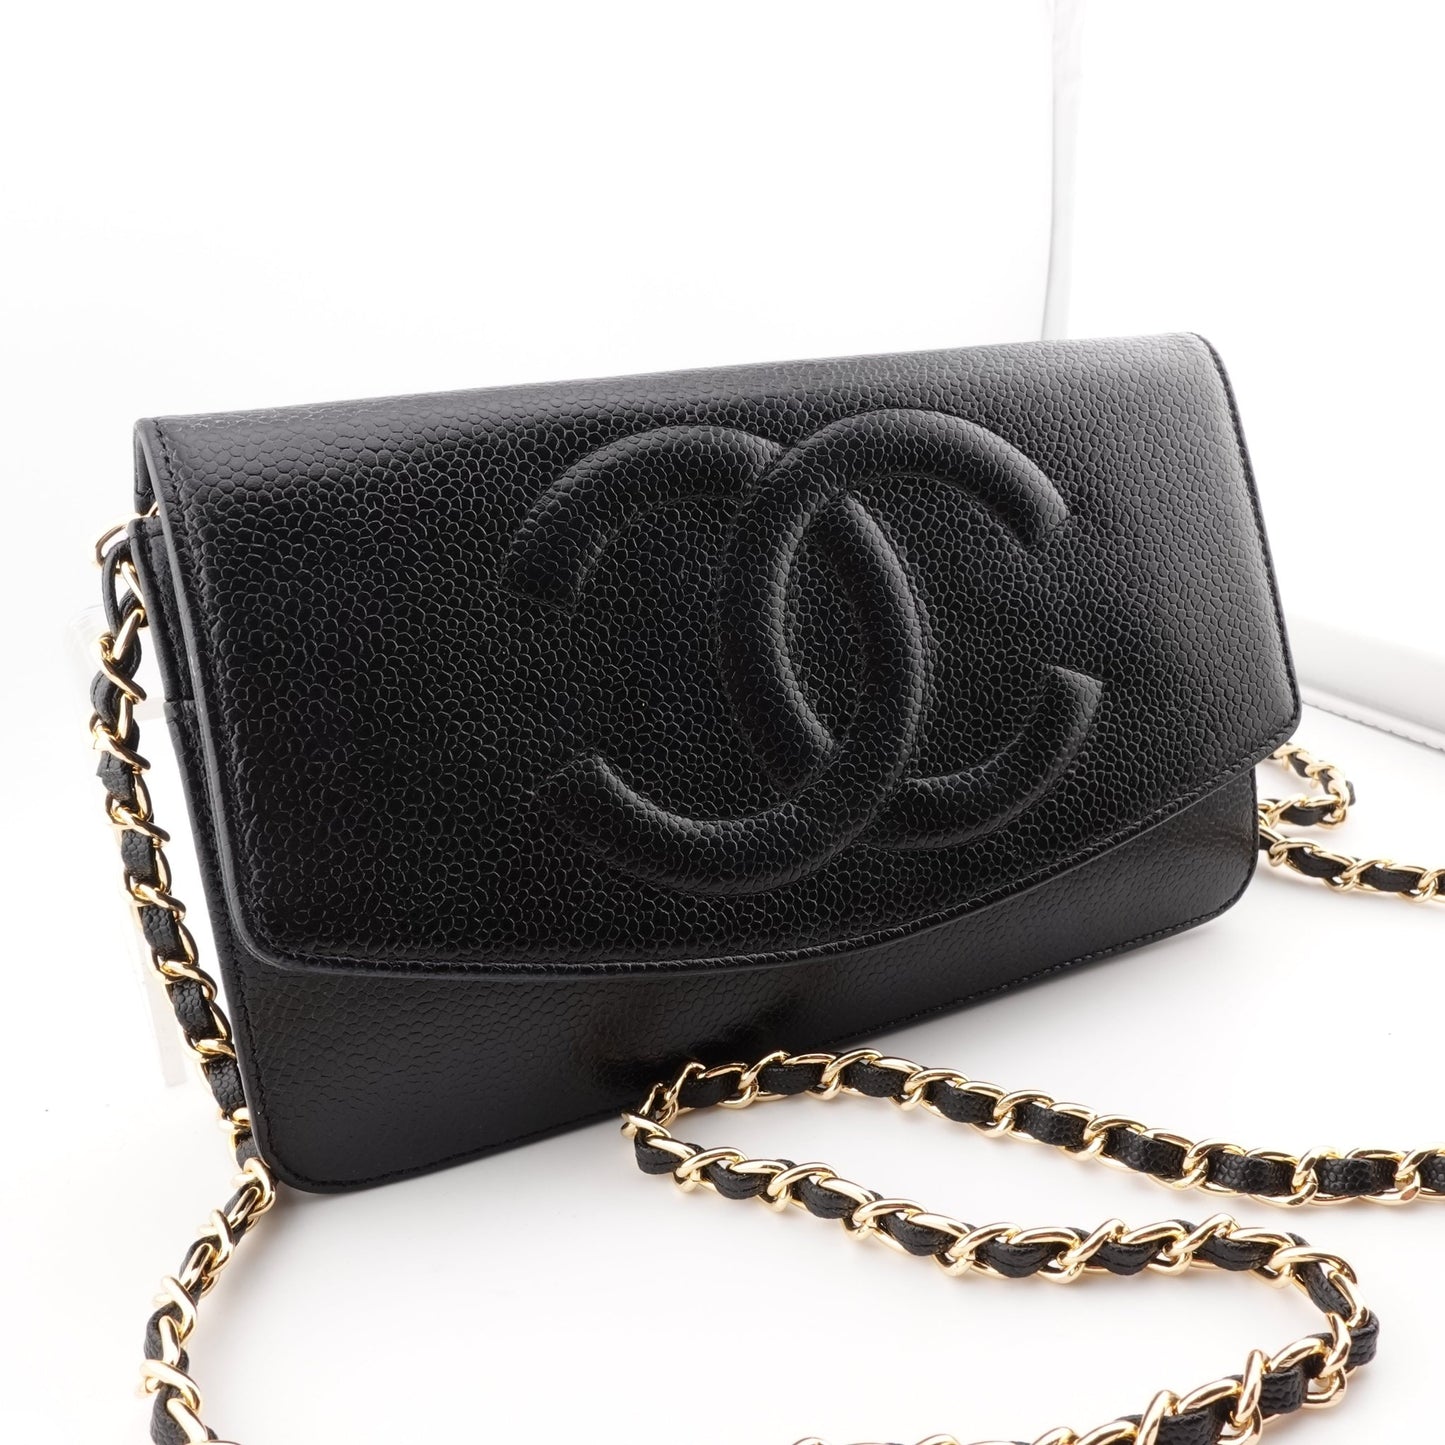 CHANEL Caviar Leather Timeless Wallet on Chain - Bag Envy